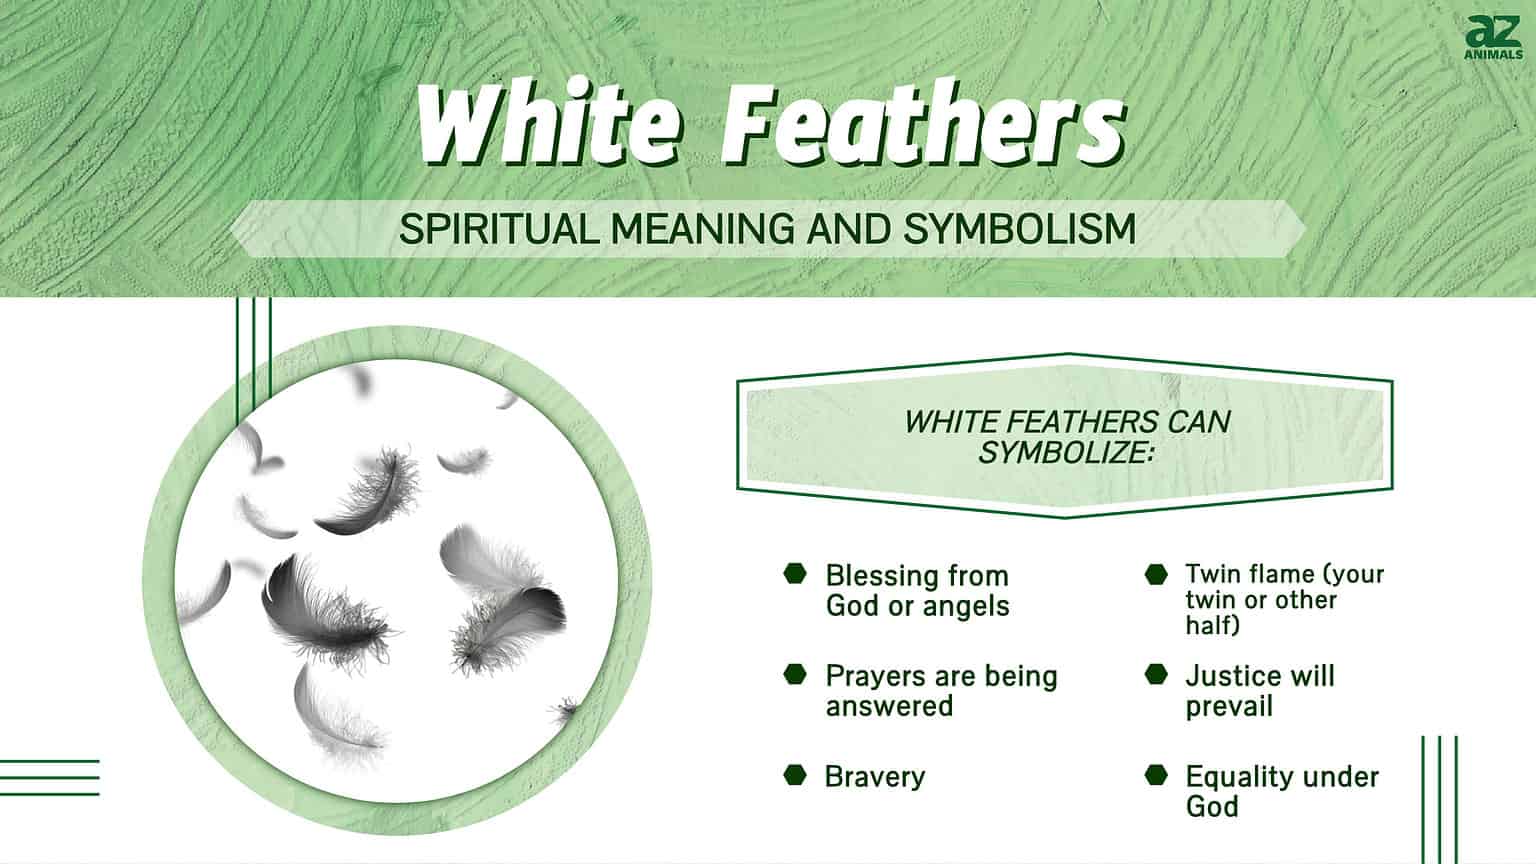 The Spiritual Meaning and Symbolism of White Feathers - A-Z Animals